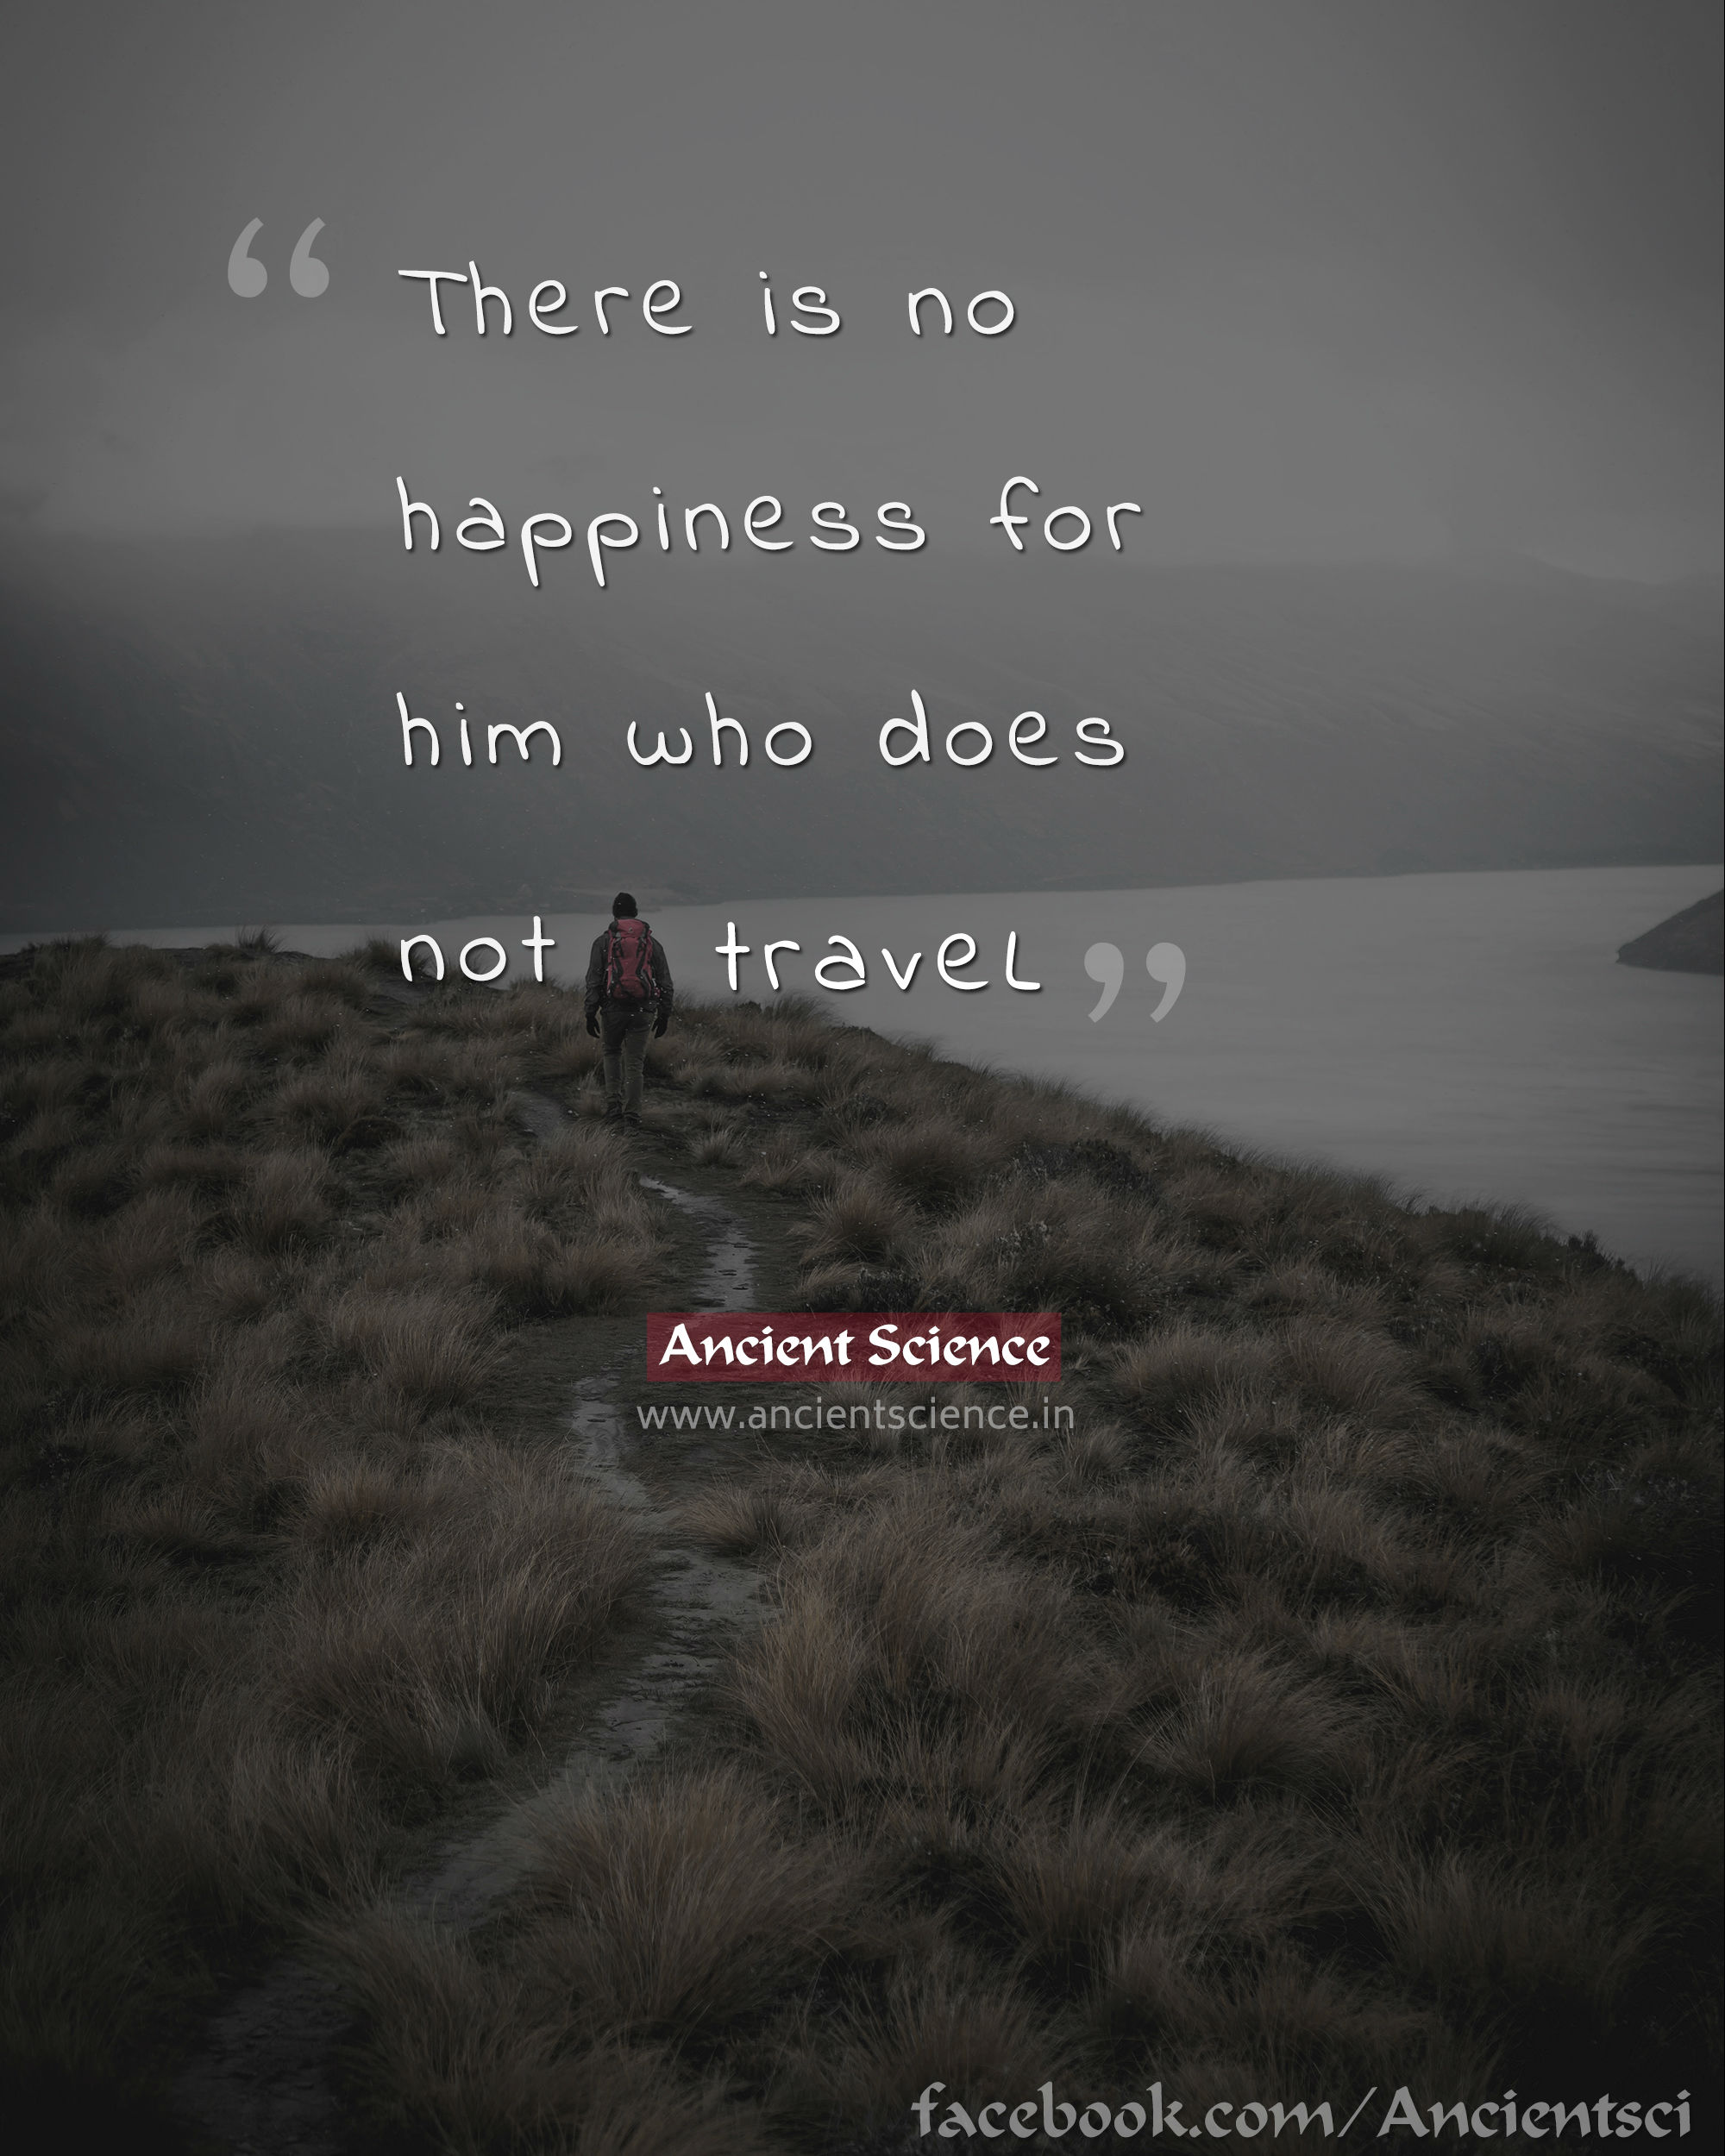 There is no happiness for him who does not travel.